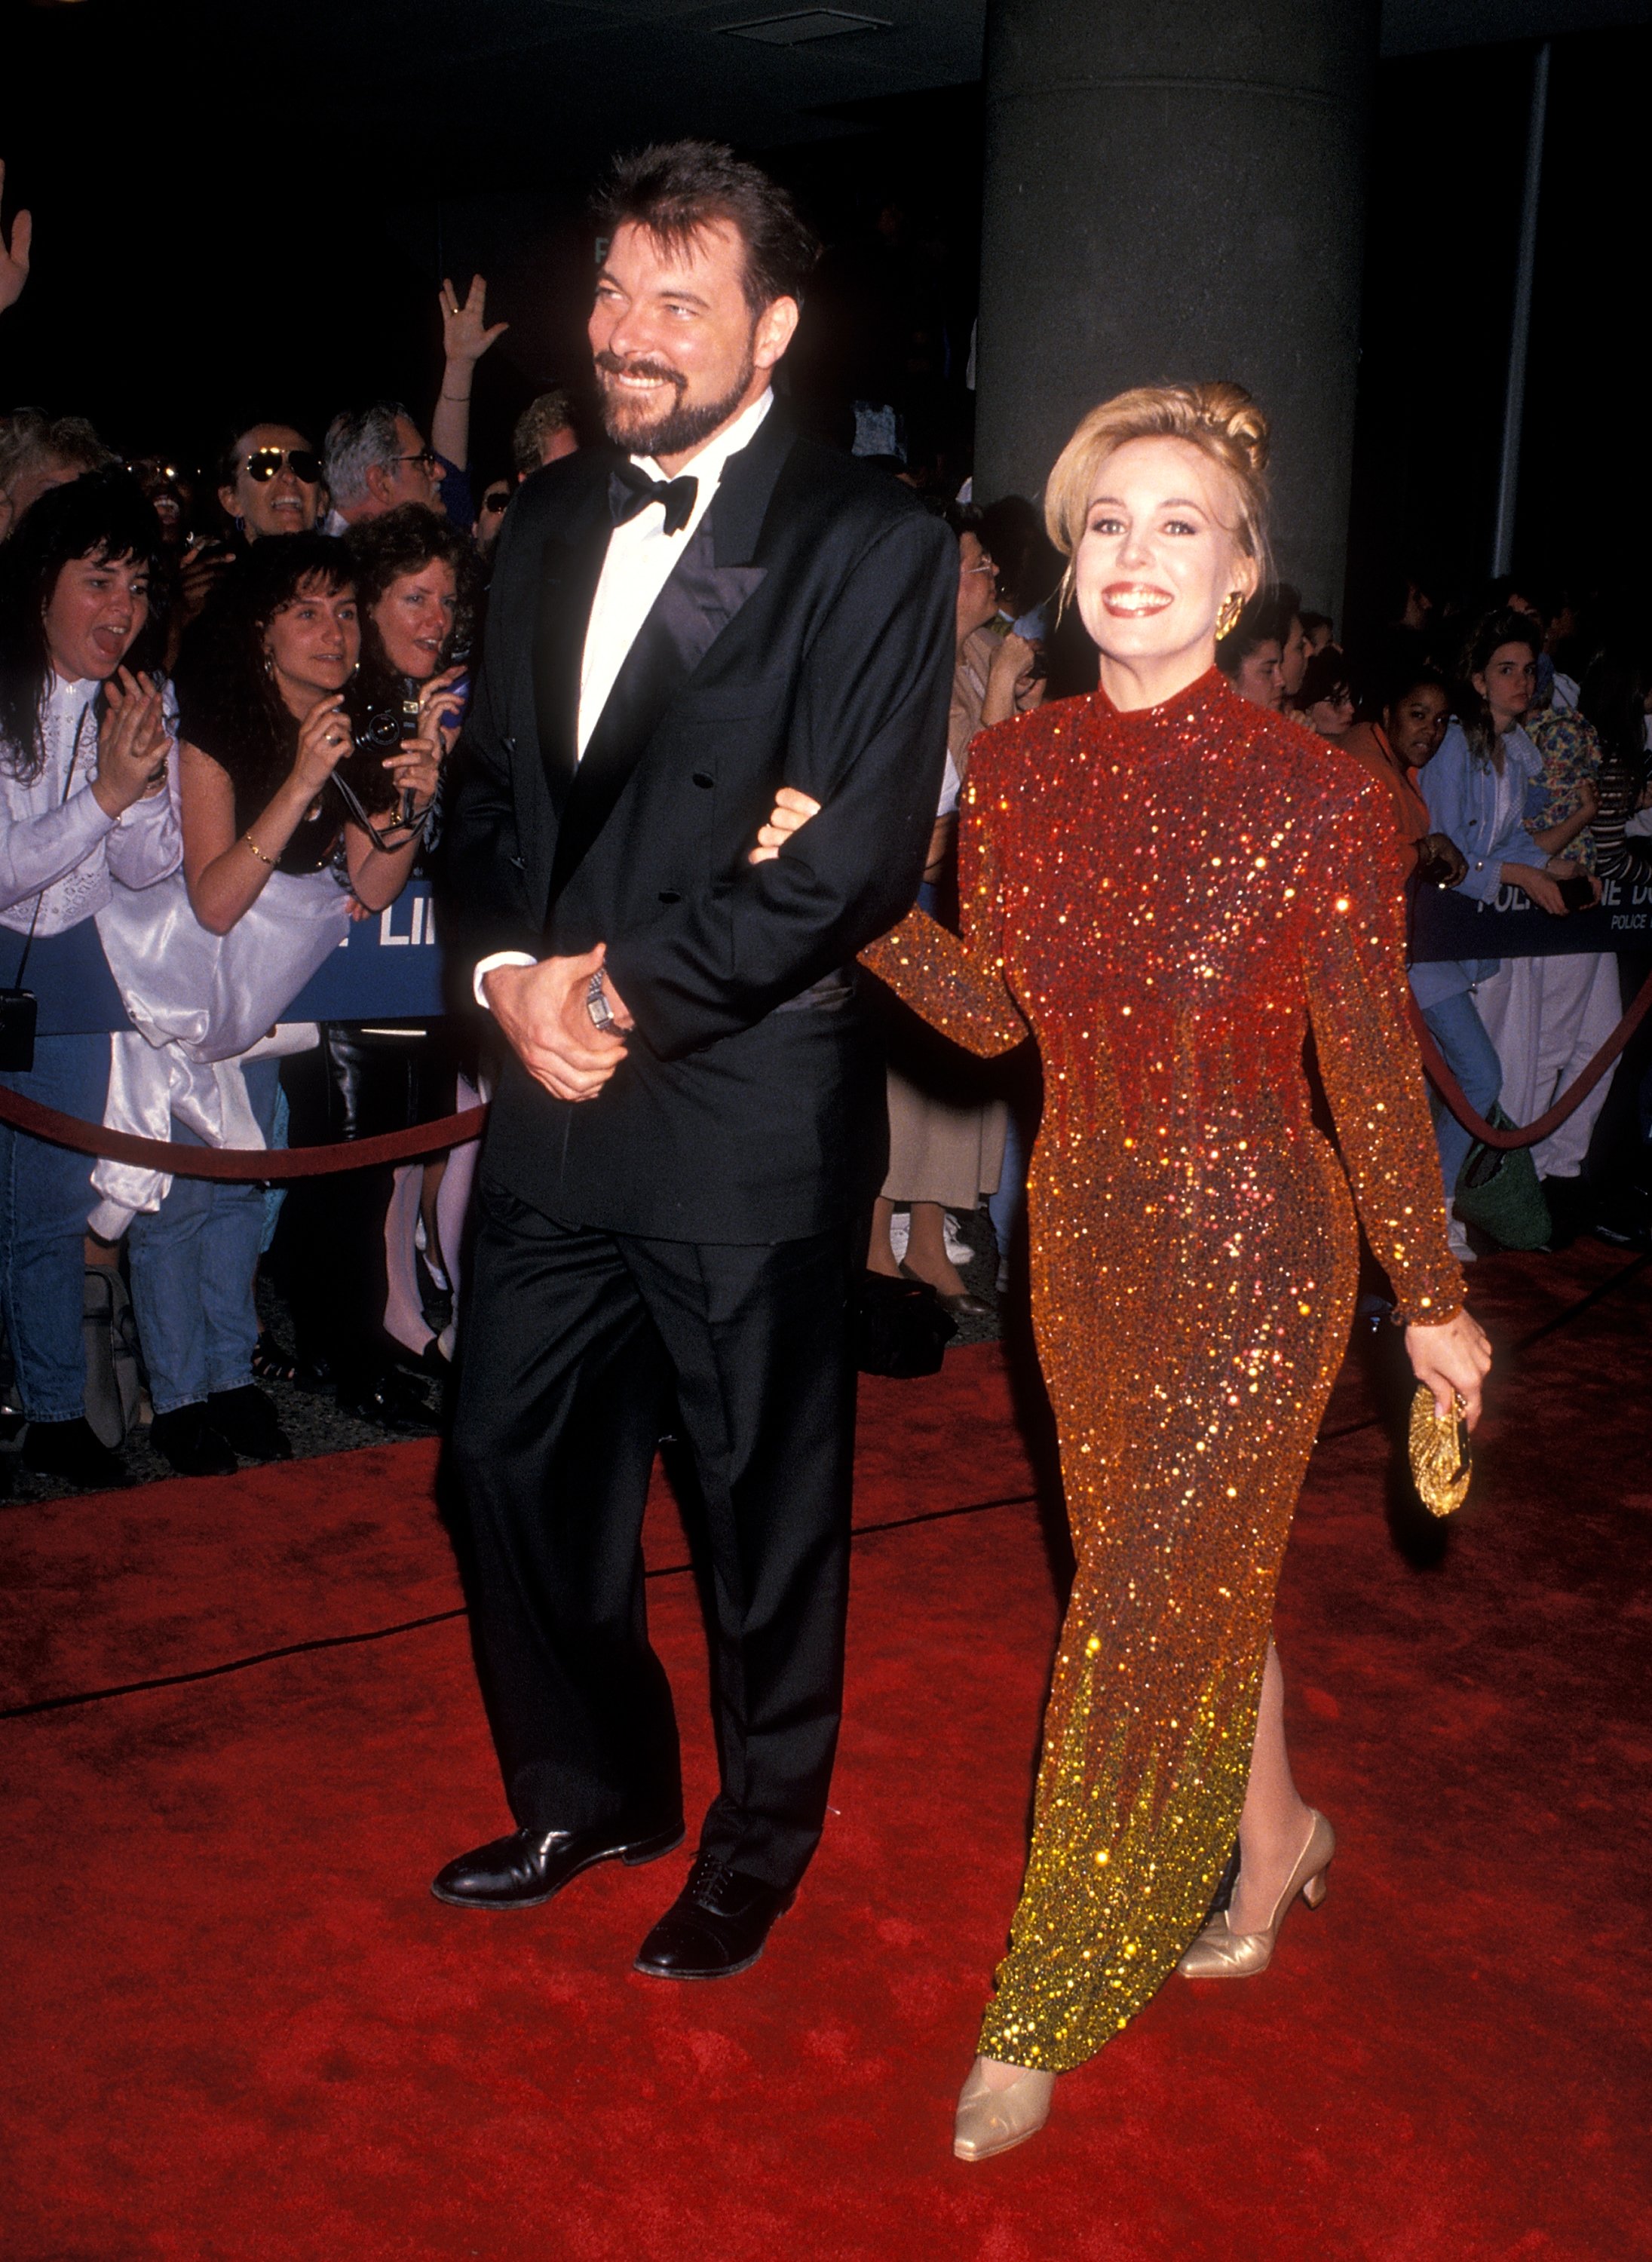 Jonathan Frakes and Genie Francis at the 20th Annual Daytime Emmy Awards on May 26, 1993, in New York City. | Source: Ron Galella, Ltd./Ron Galella Collection/Getty Images